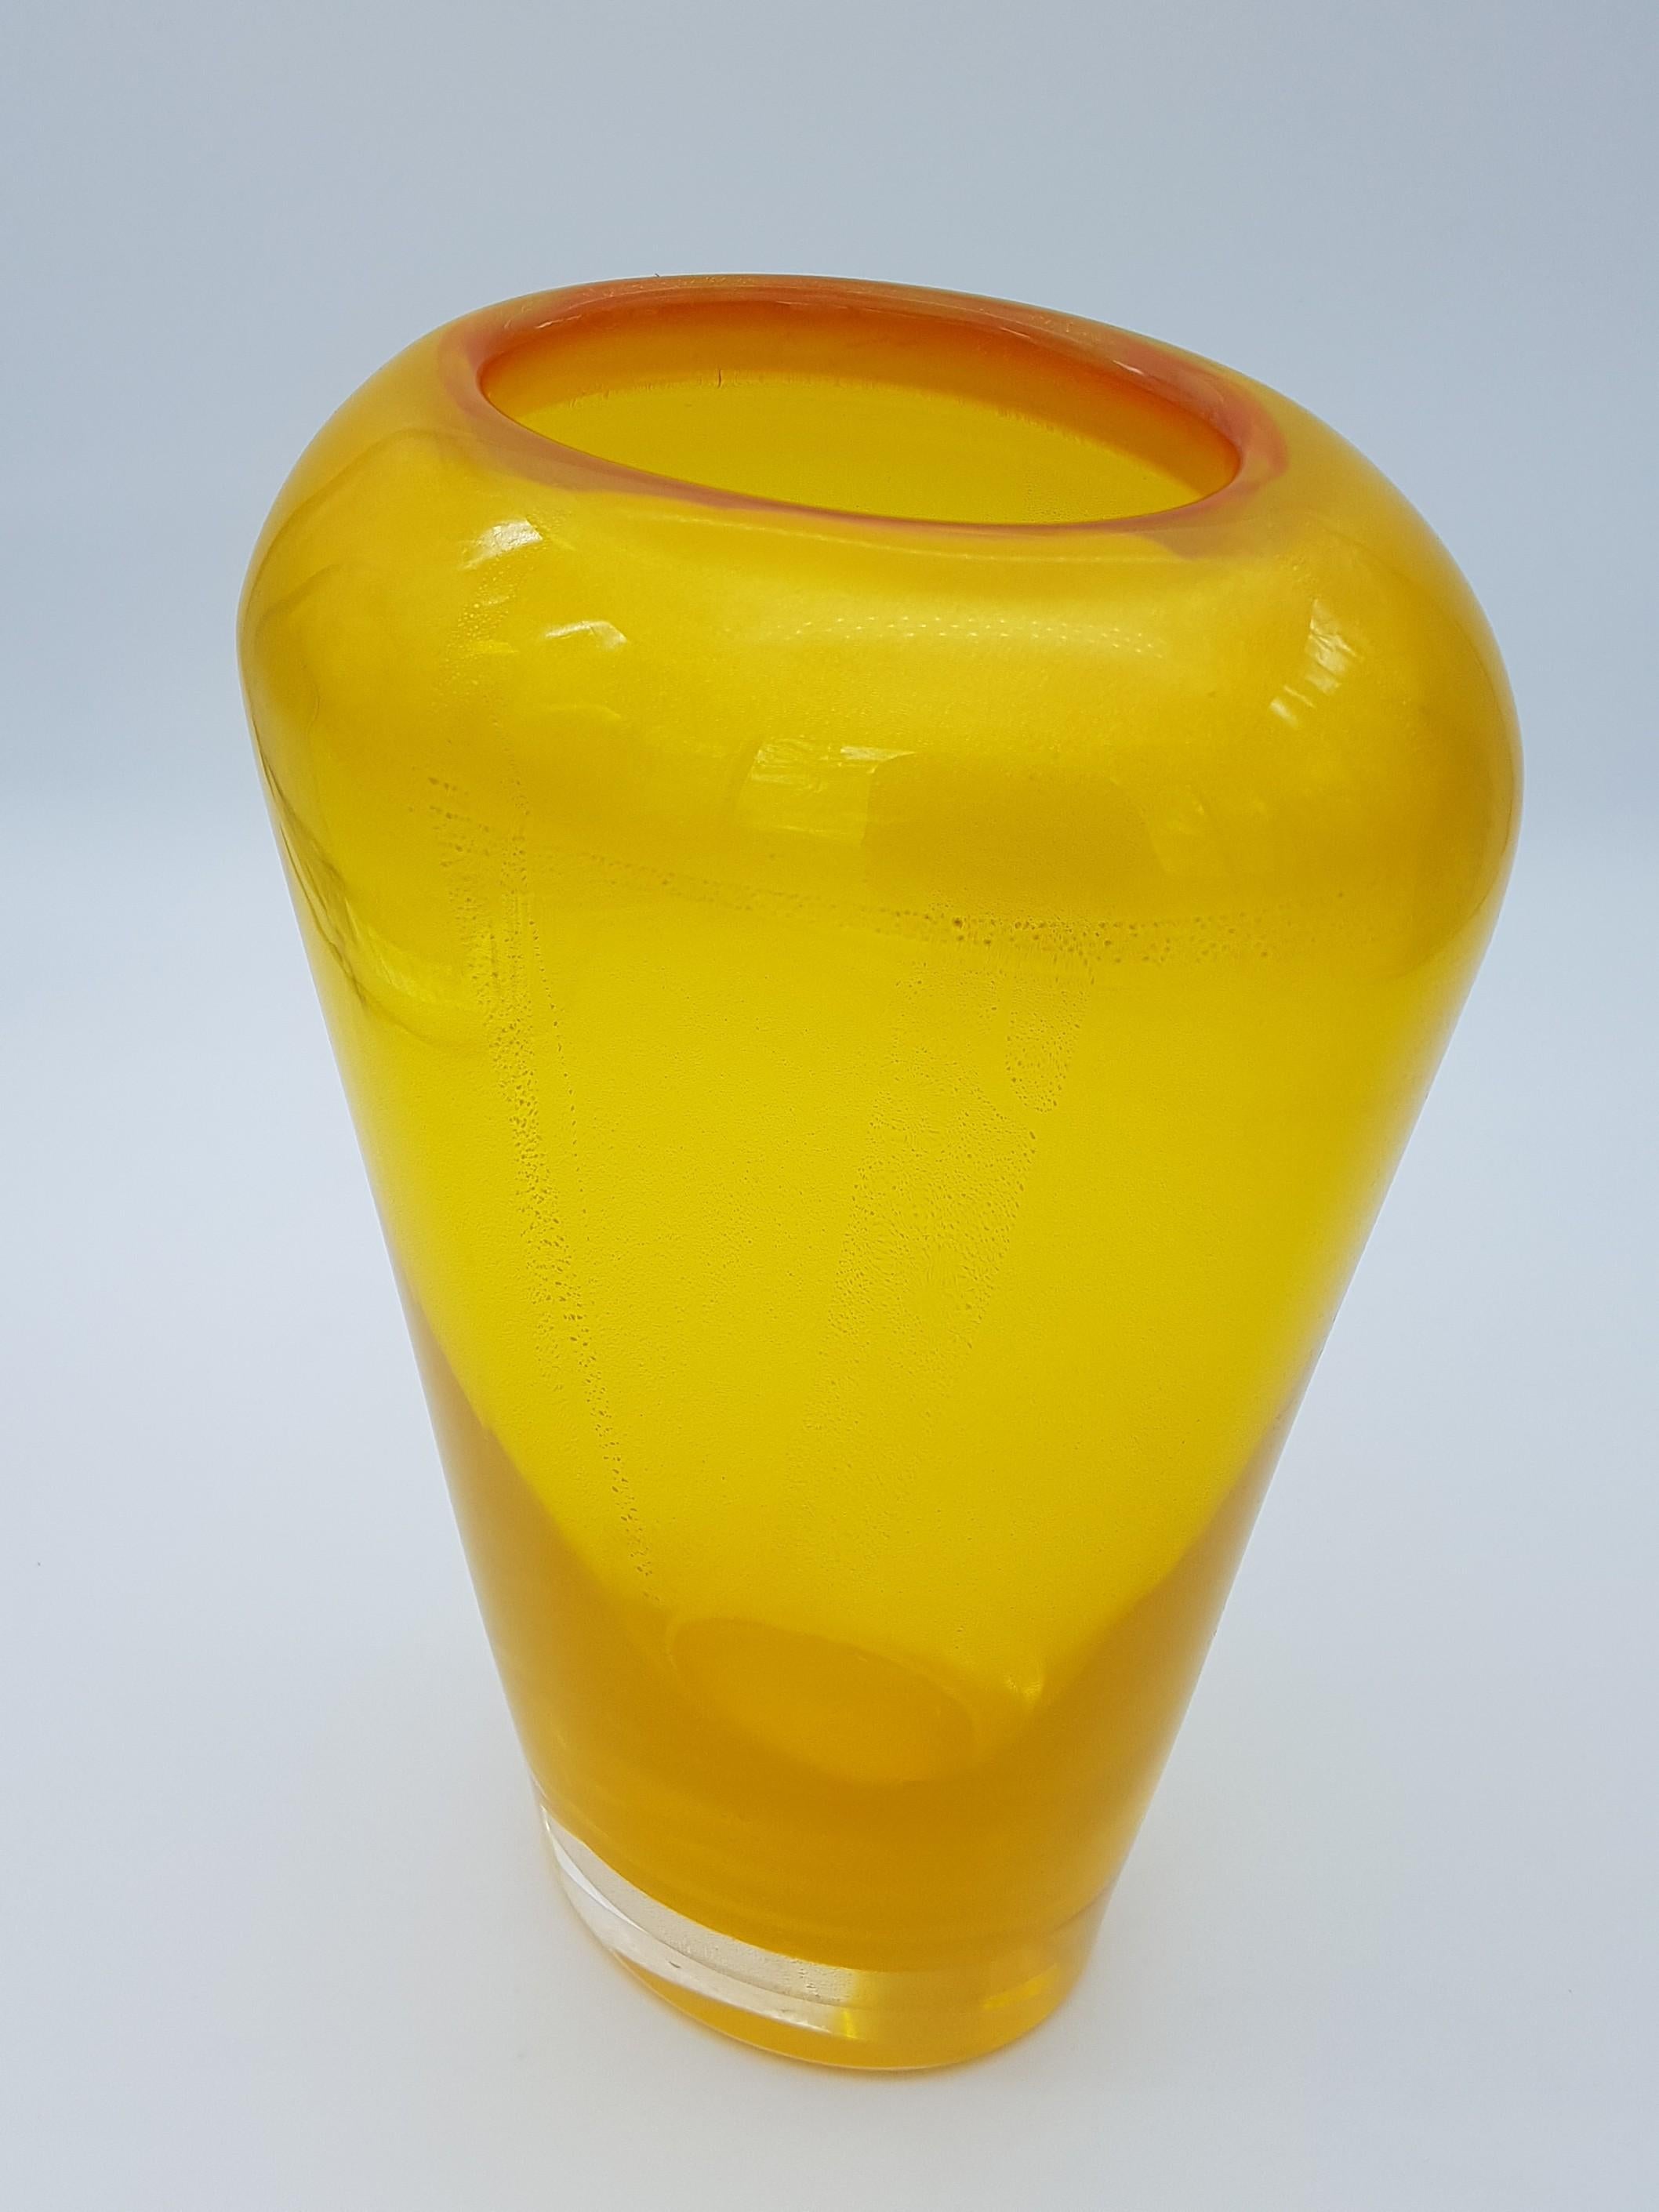 Modern Murano Glass Vase Gold Yellow Color by Cenedese, Late 1990s For Sale 4